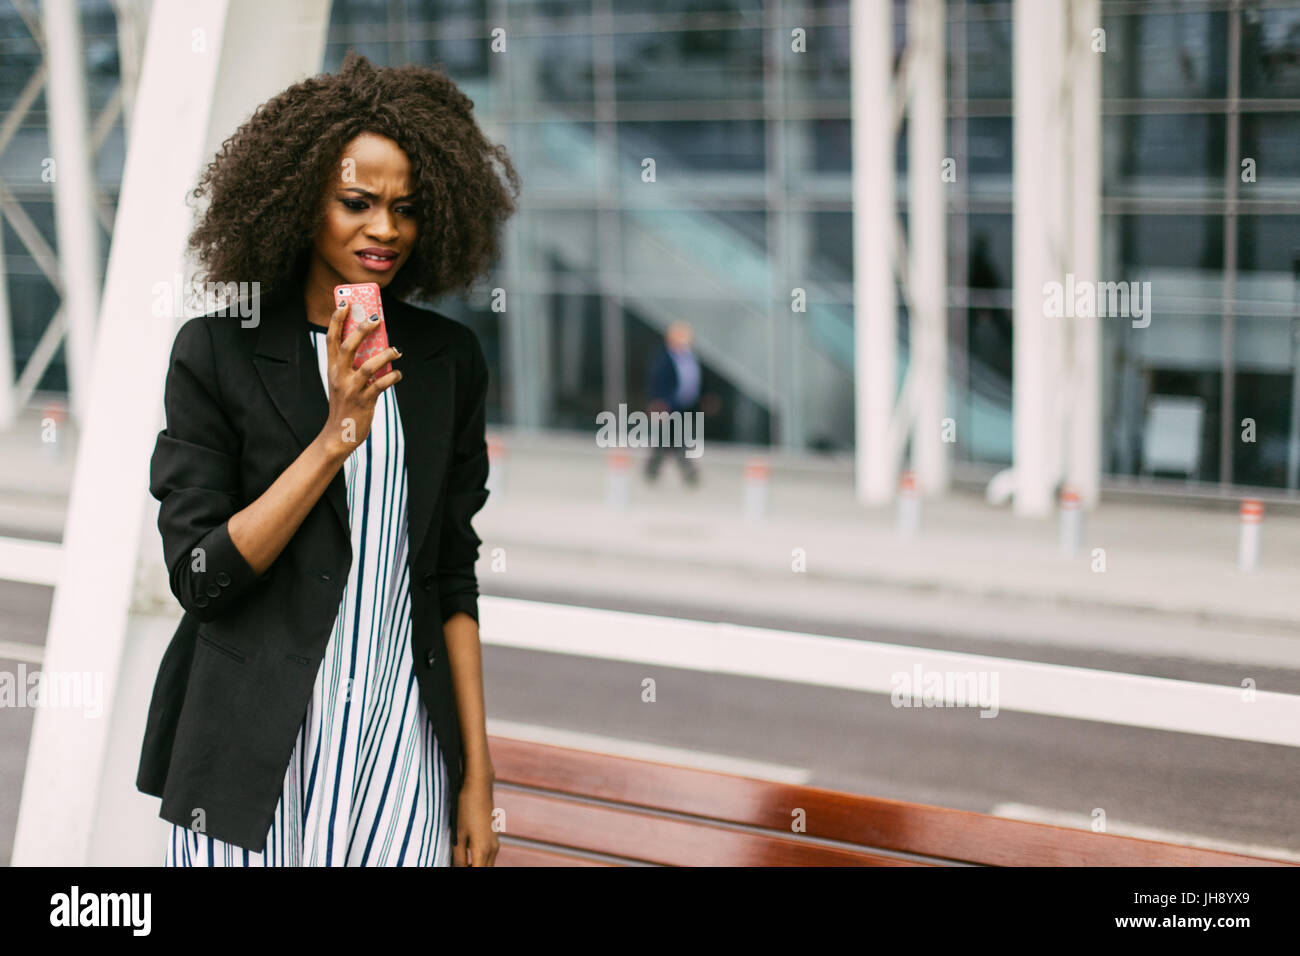 Close-up portrait of the sad afro-american woman talking on the mobile phone in the street. Stock Photo